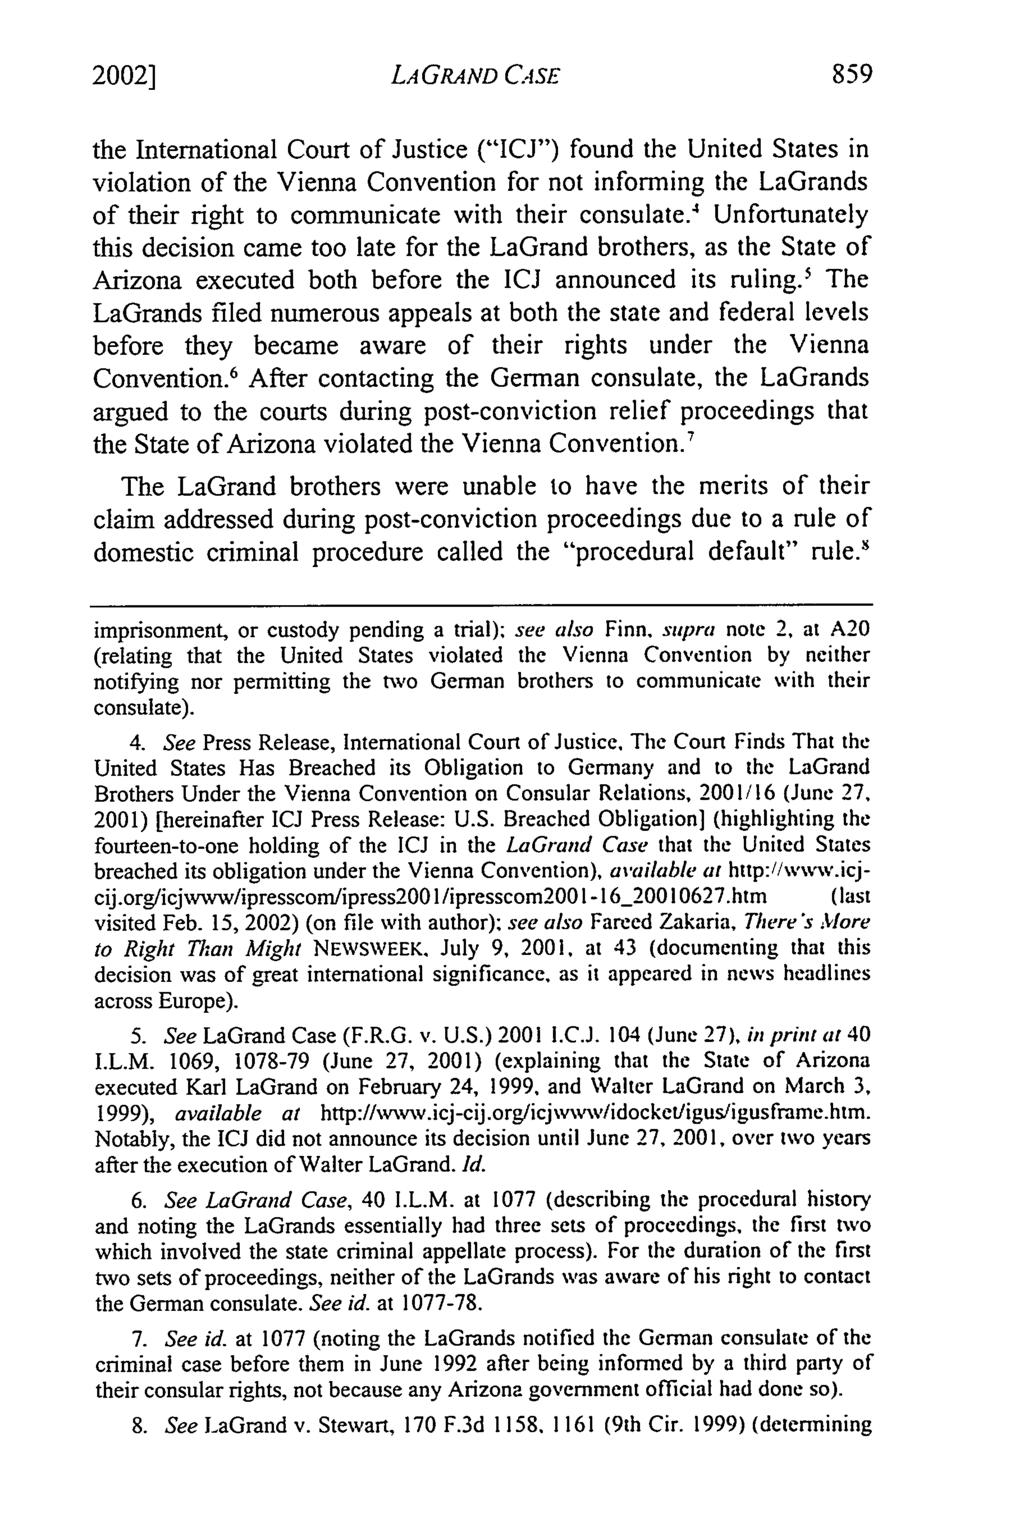 20021 LA GRAND CASE 859 the International Court of Justice ("ICJ") found the United States in violation of the Vienna Convention for not informing the LaGrands of their right to communicate with